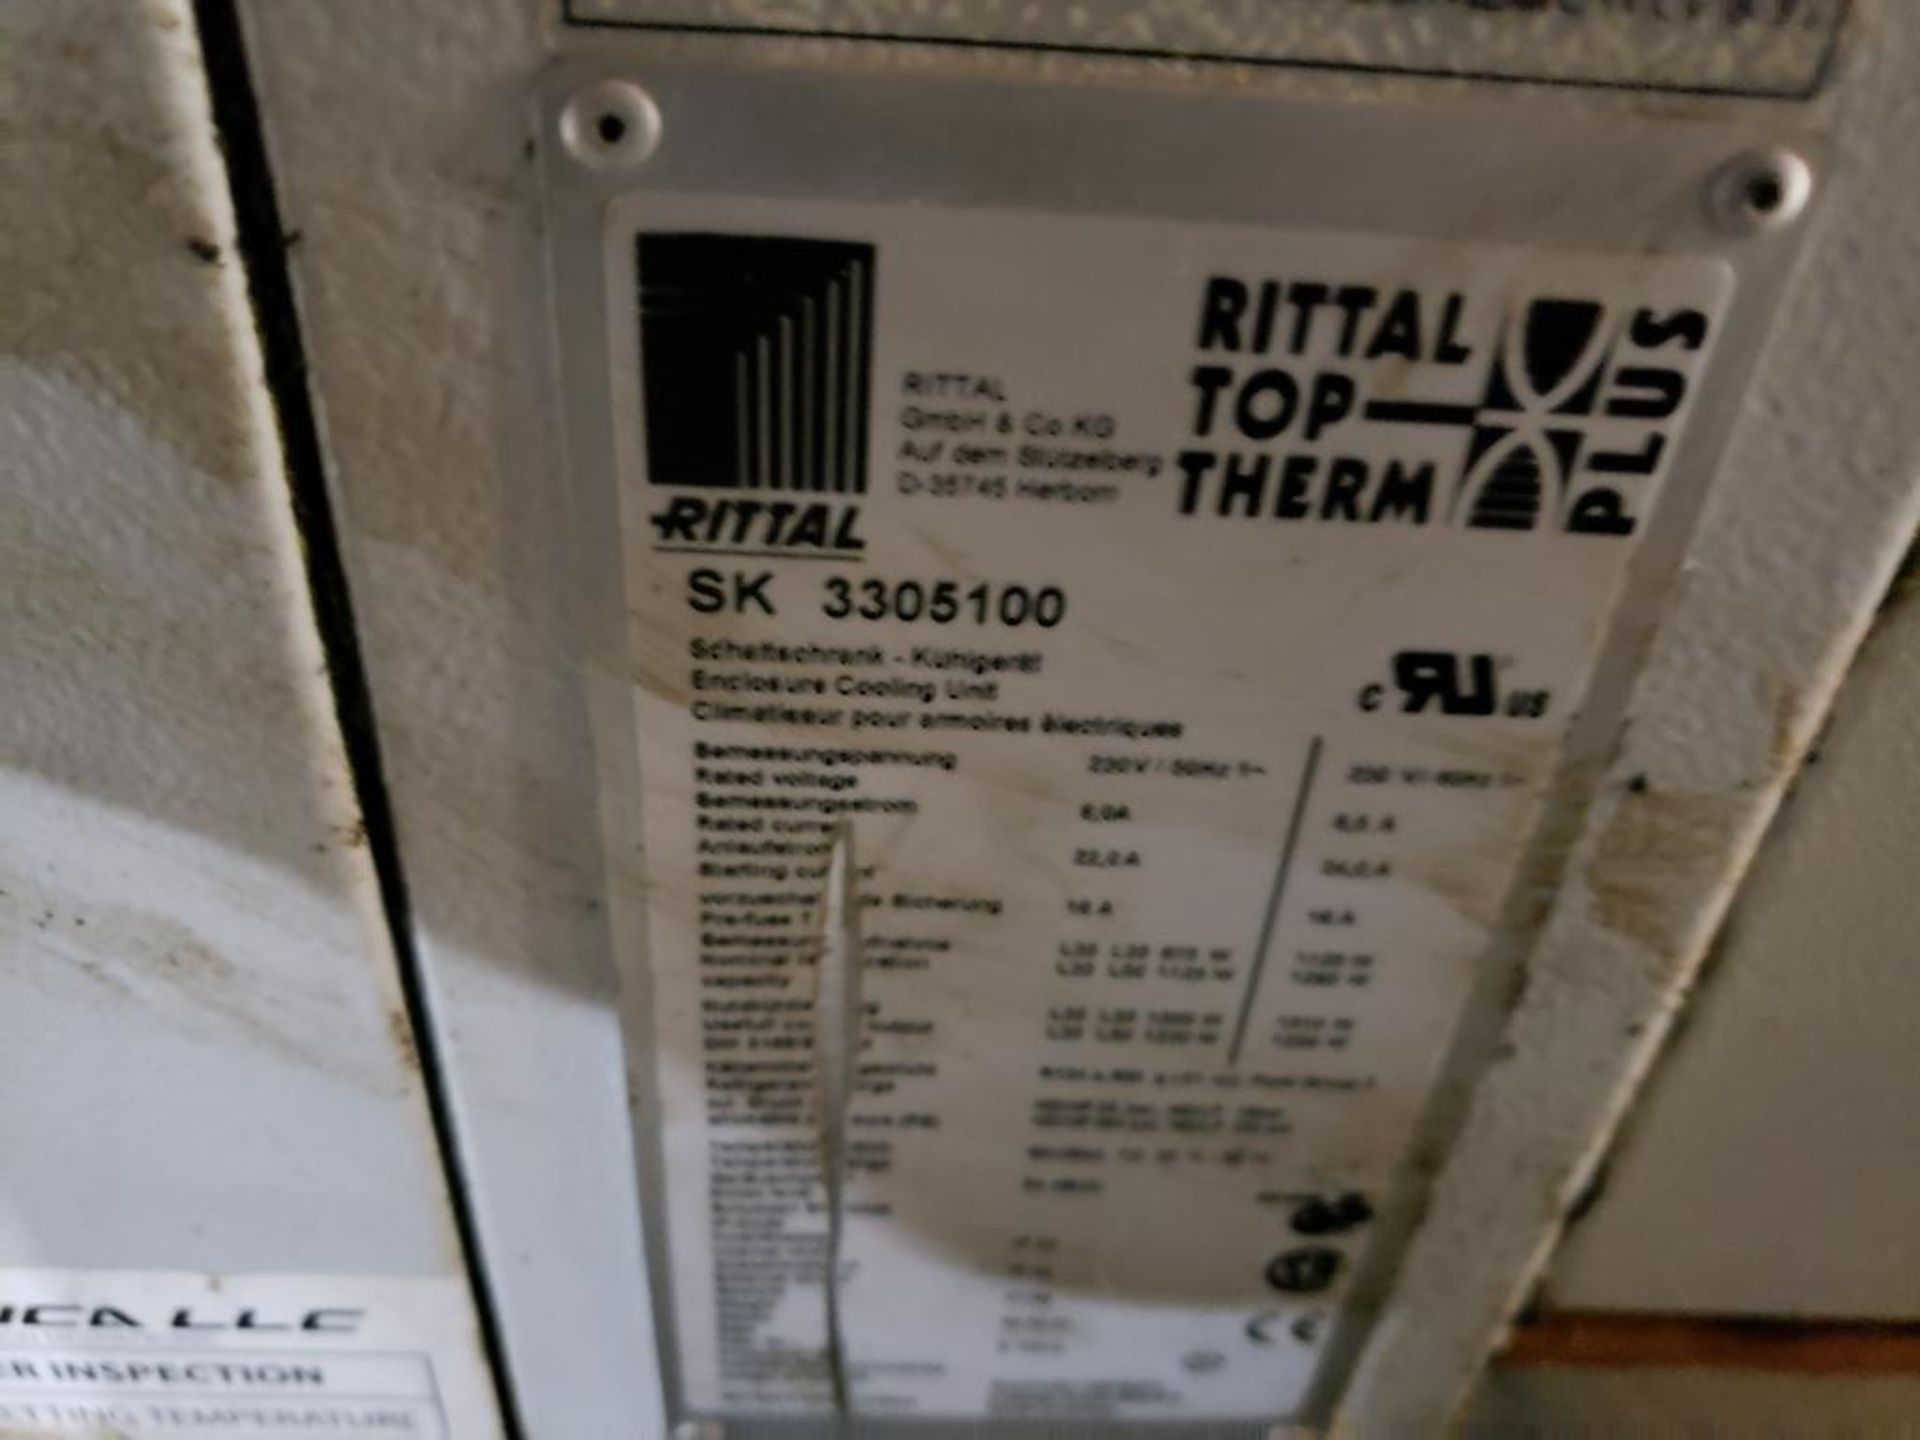 Rittal electronic enclosure air conditioner. Model number SK-3305100. - Image 3 of 3